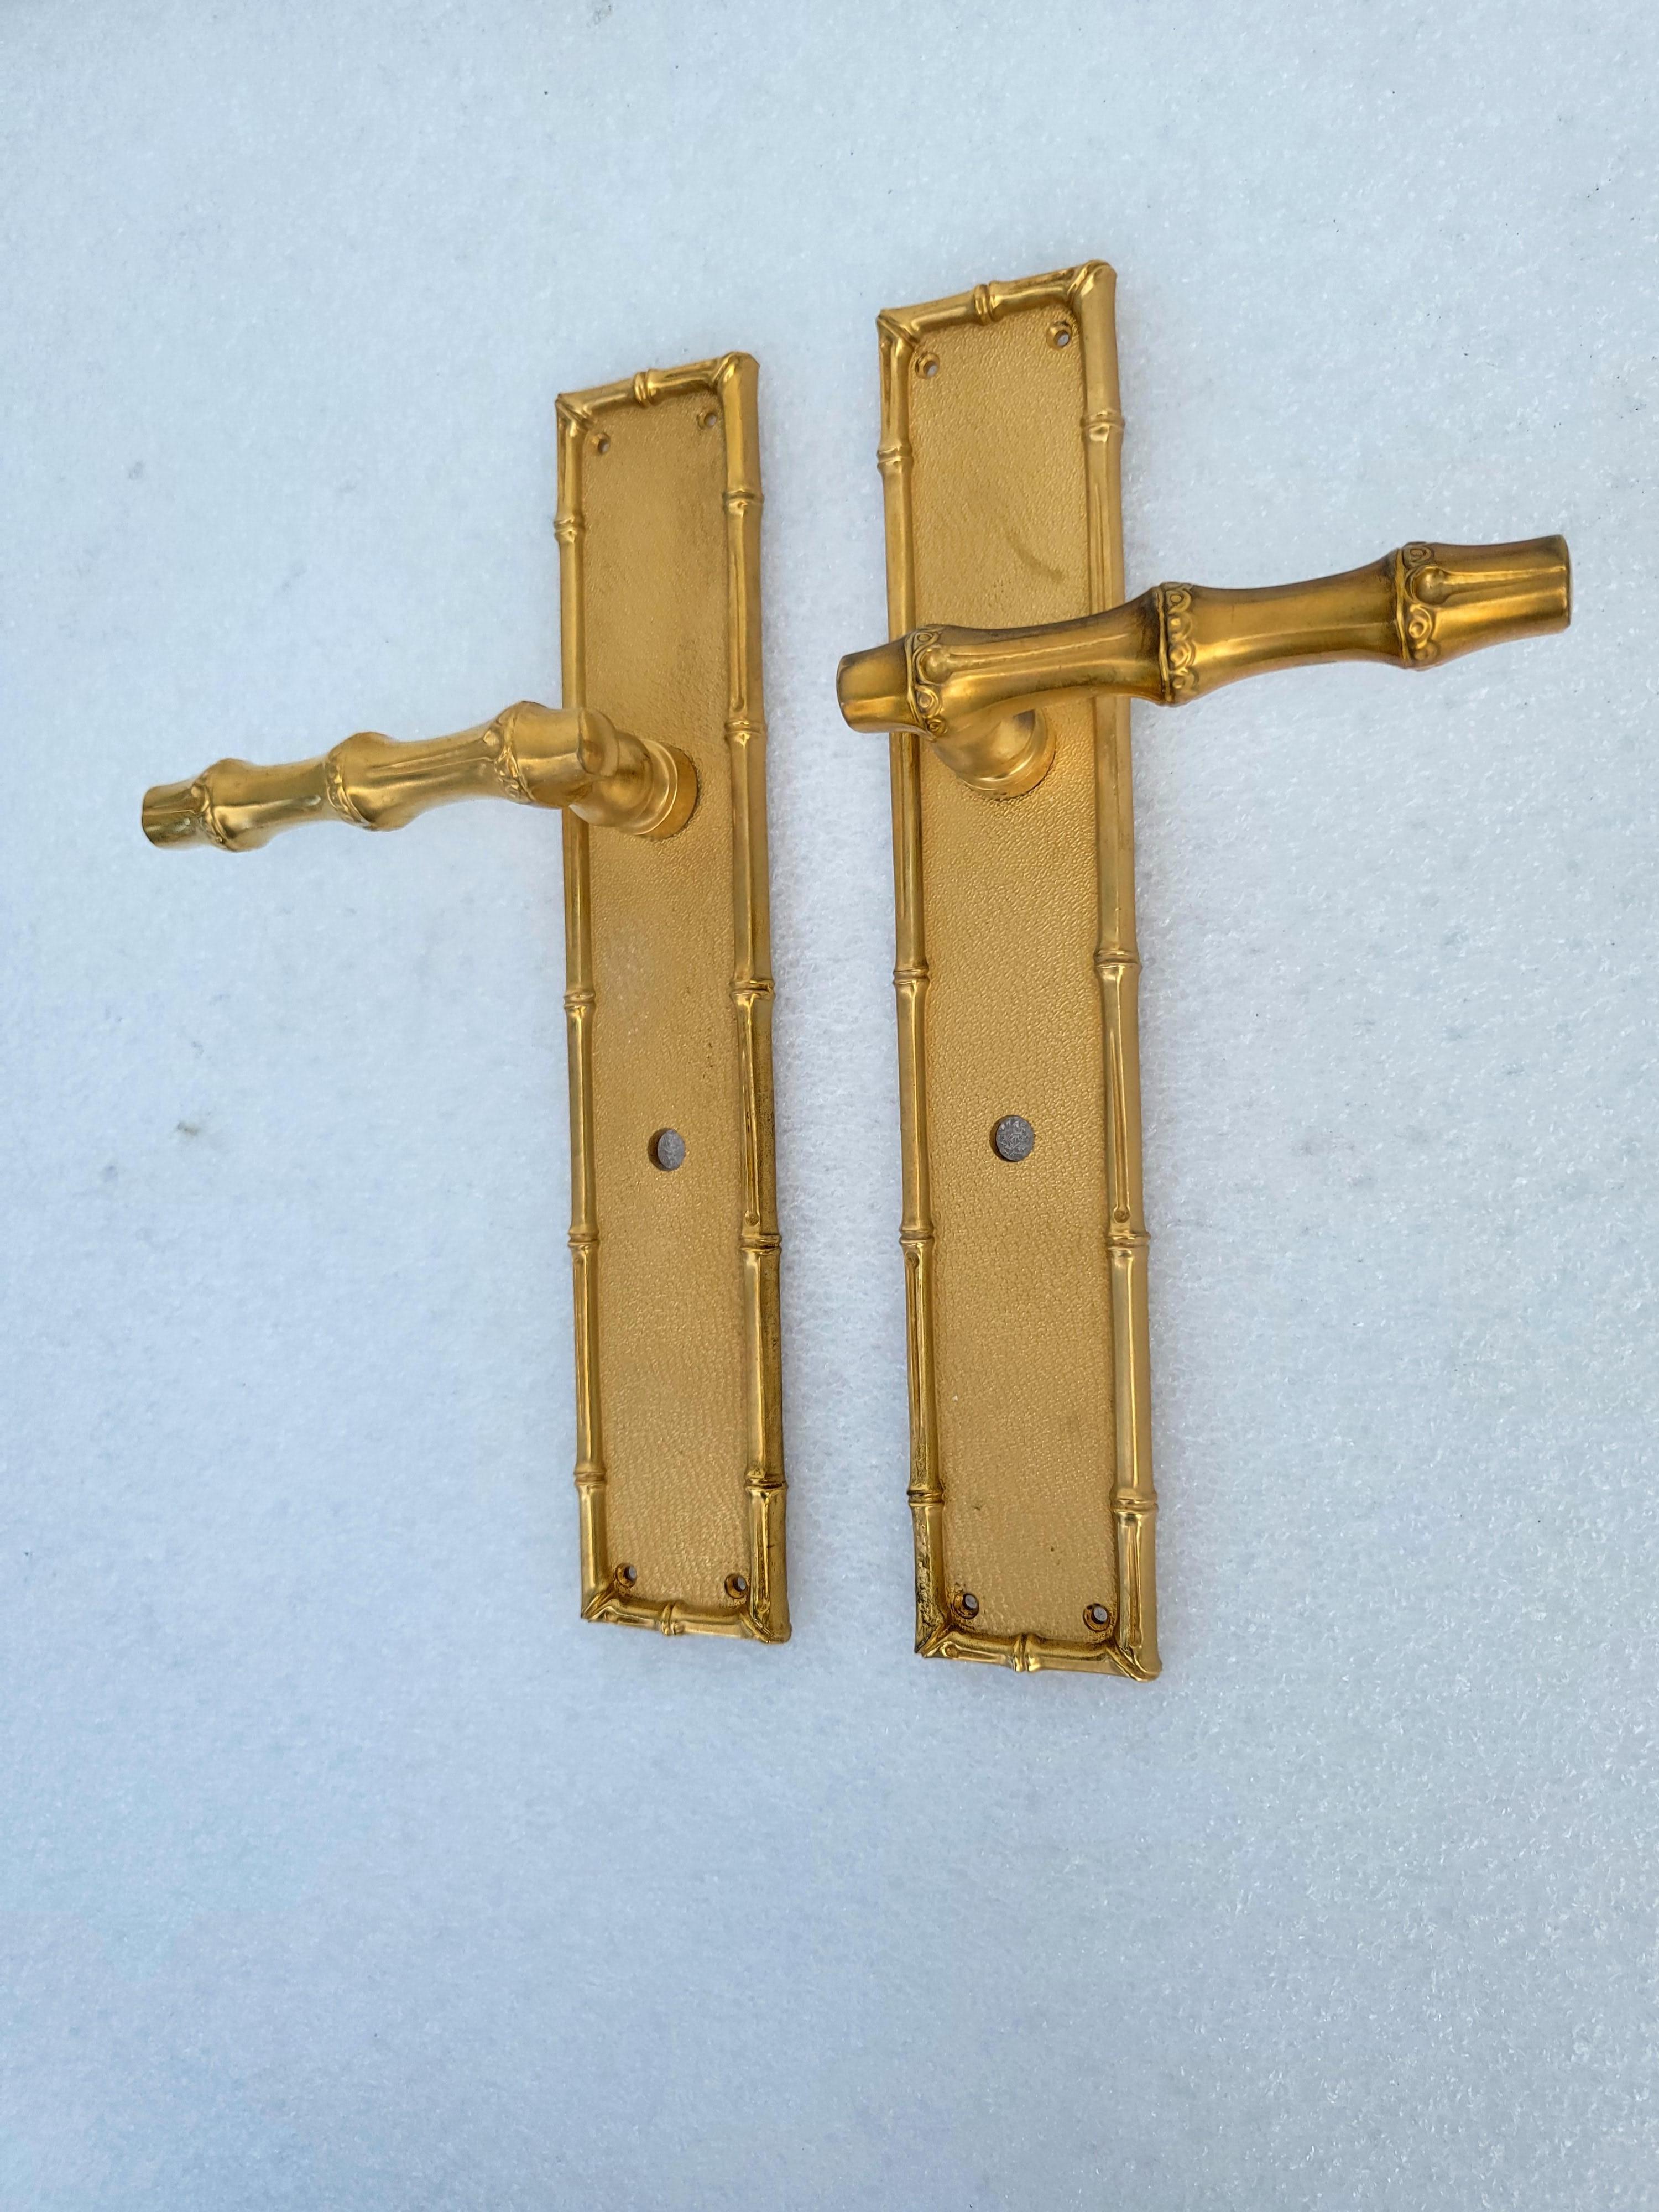 Maison Baguès Door Handles, 8 Pairs Available, Priced by Pair In Good Condition For Sale In Miami, FL